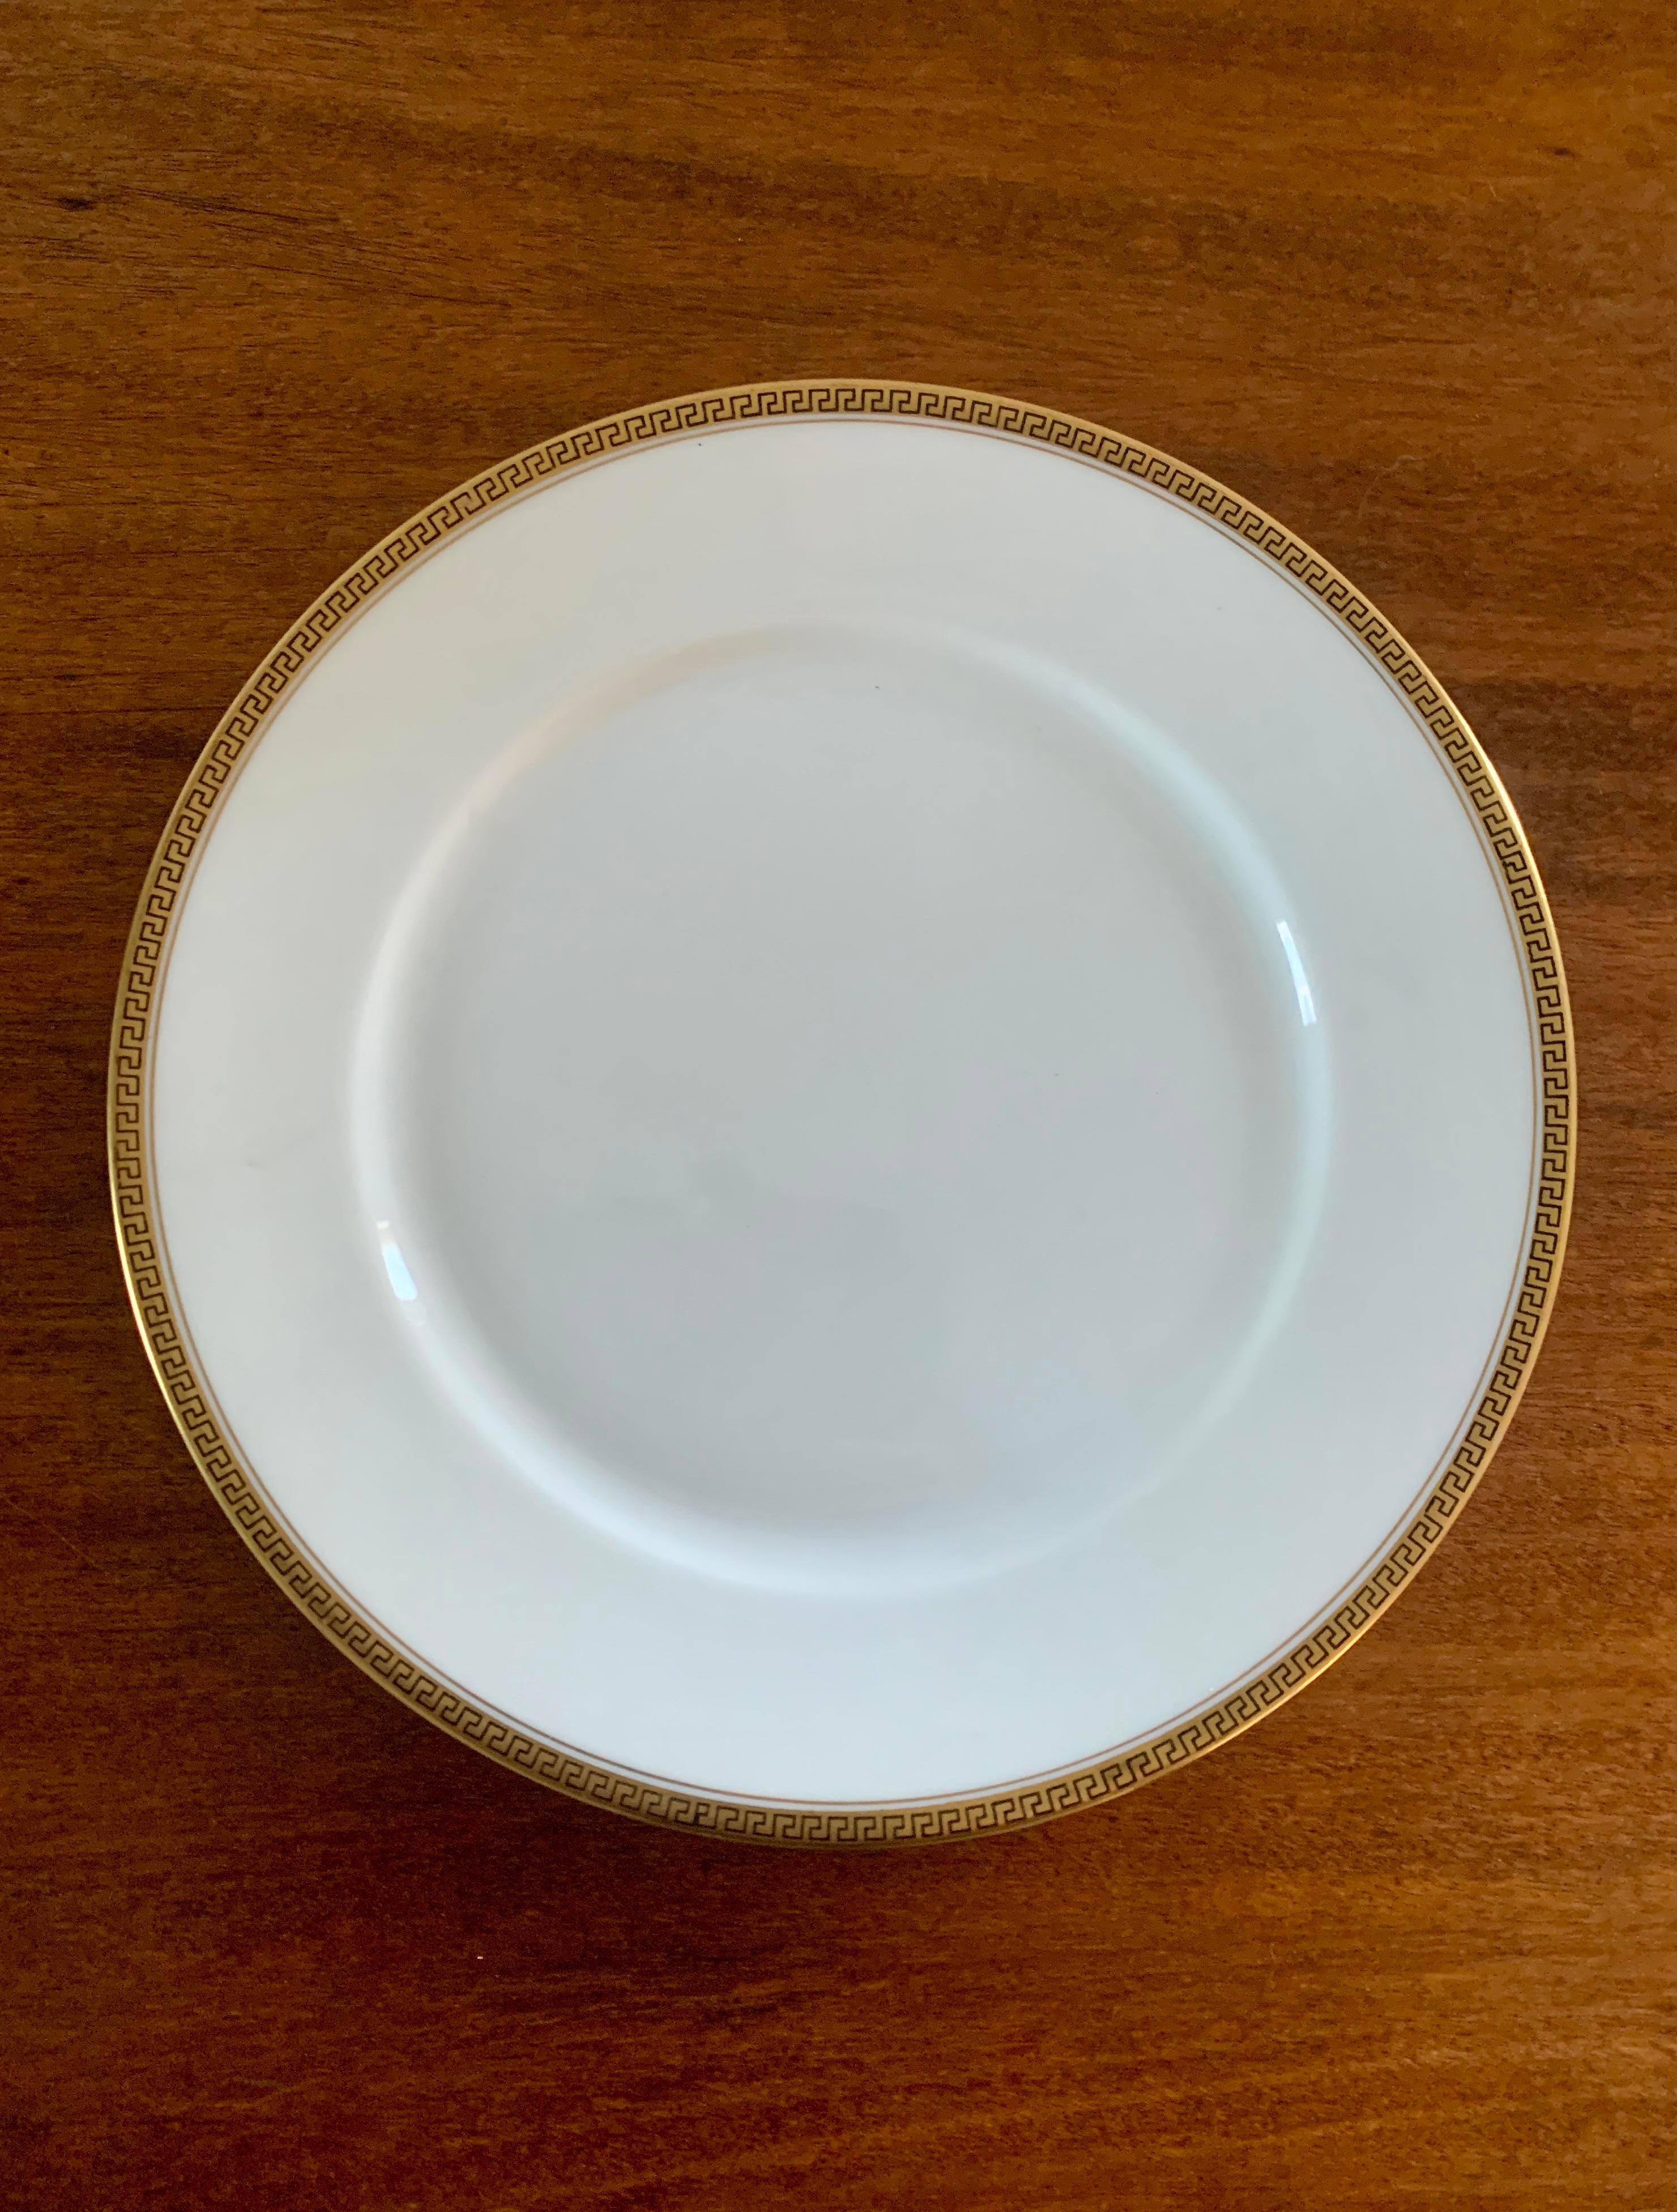 A gorgeous set of ten Greek key rimmed luncheon plates

By KPM Porcelain

Germany, Circa 1920s

Measures: 8.88